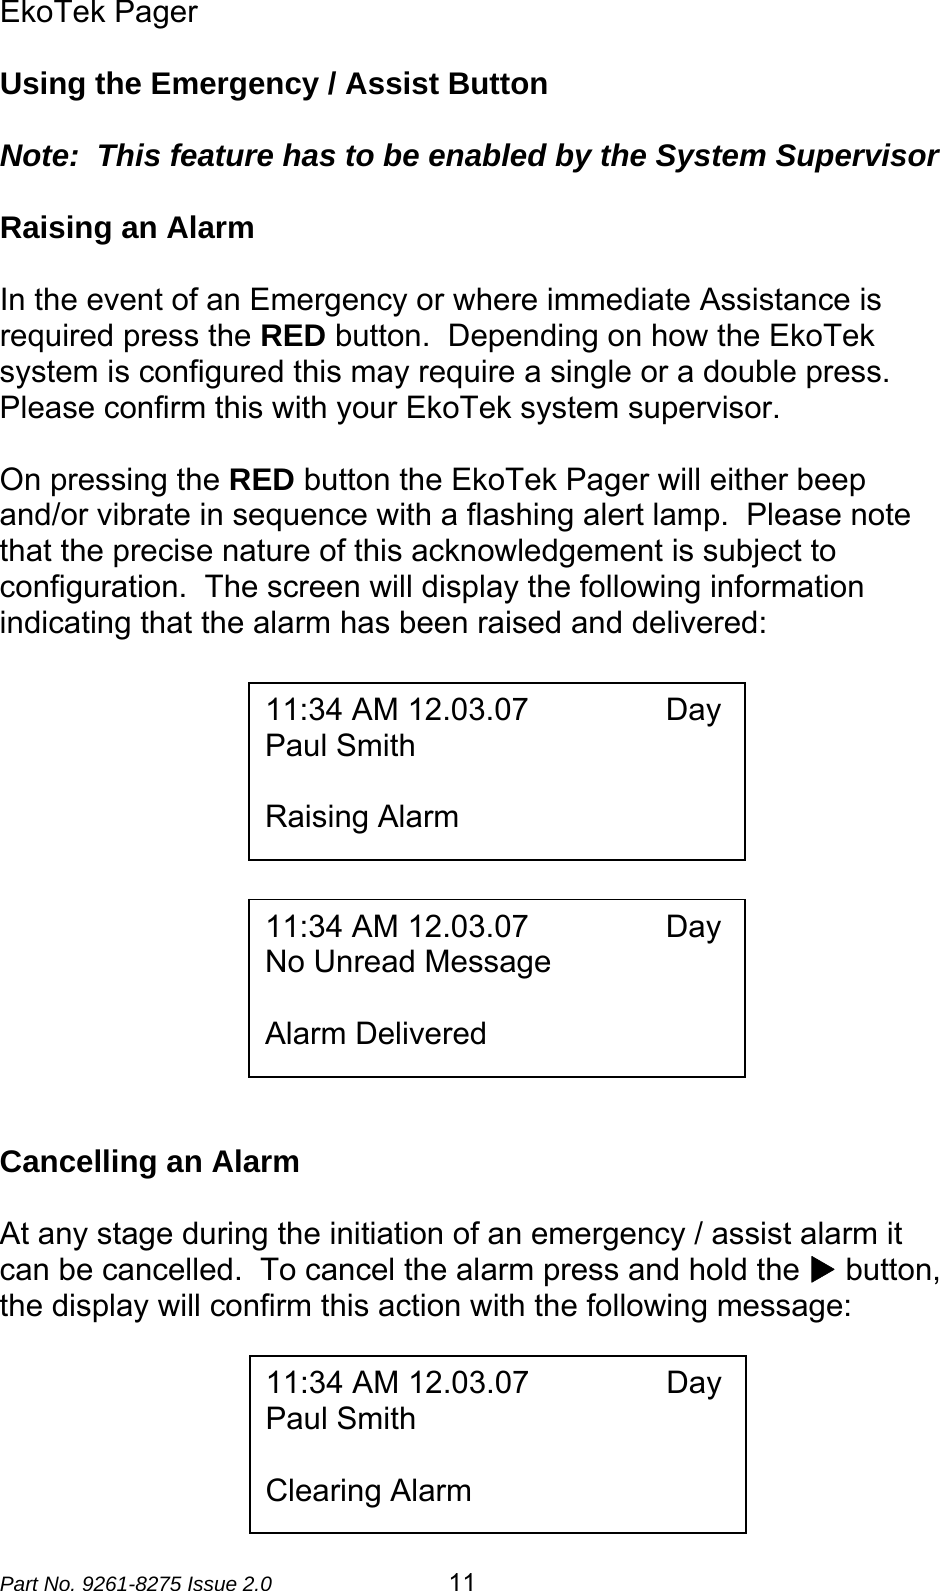 EkoTek Pager  Part No. 9261-8275 Issue 2.0  11 Using the Emergency / Assist Button  Note:  This feature has to be enabled by the System Supervisor  Raising an Alarm  In the event of an Emergency or where immediate Assistance is required press the RED button.  Depending on how the EkoTek system is configured this may require a single or a double press.  Please confirm this with your EkoTek system supervisor.  On pressing the RED button the EkoTek Pager will either beep and/or vibrate in sequence with a flashing alert lamp.  Please note that the precise nature of this acknowledgement is subject to configuration.  The screen will display the following information indicating that the alarm has been raised and delivered:                Cancelling an Alarm  At any stage during the initiation of an emergency / assist alarm it can be cancelled.  To cancel the alarm press and hold the X button, the display will confirm this action with the following message:       11:34 AM 12.03.07                Day No Unread Message  Alarm Delivered 11:34 AM 12.03.07                Day Paul Smith  Raising Alarm 11:34 AM 12.03.07                Day Paul Smith  Clearing Alarm 